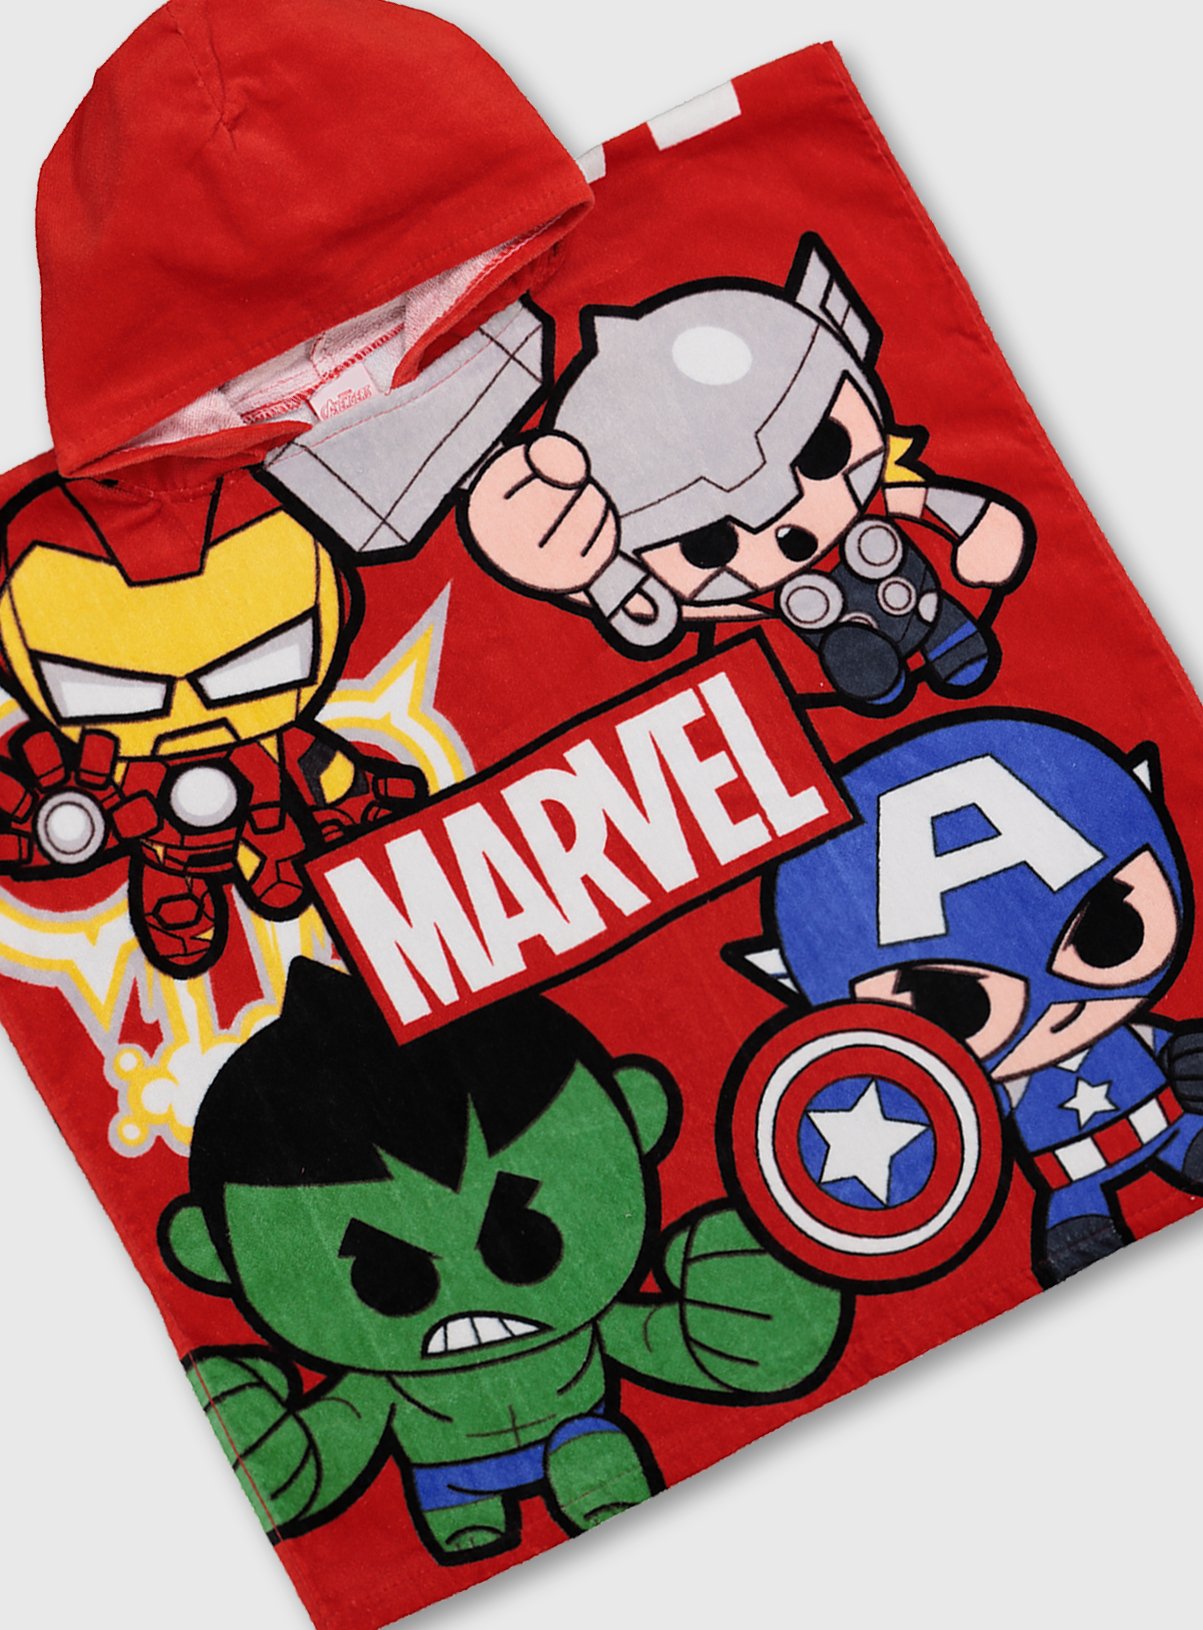 Marvel Avengers Red Hooded Poncho Towel Review